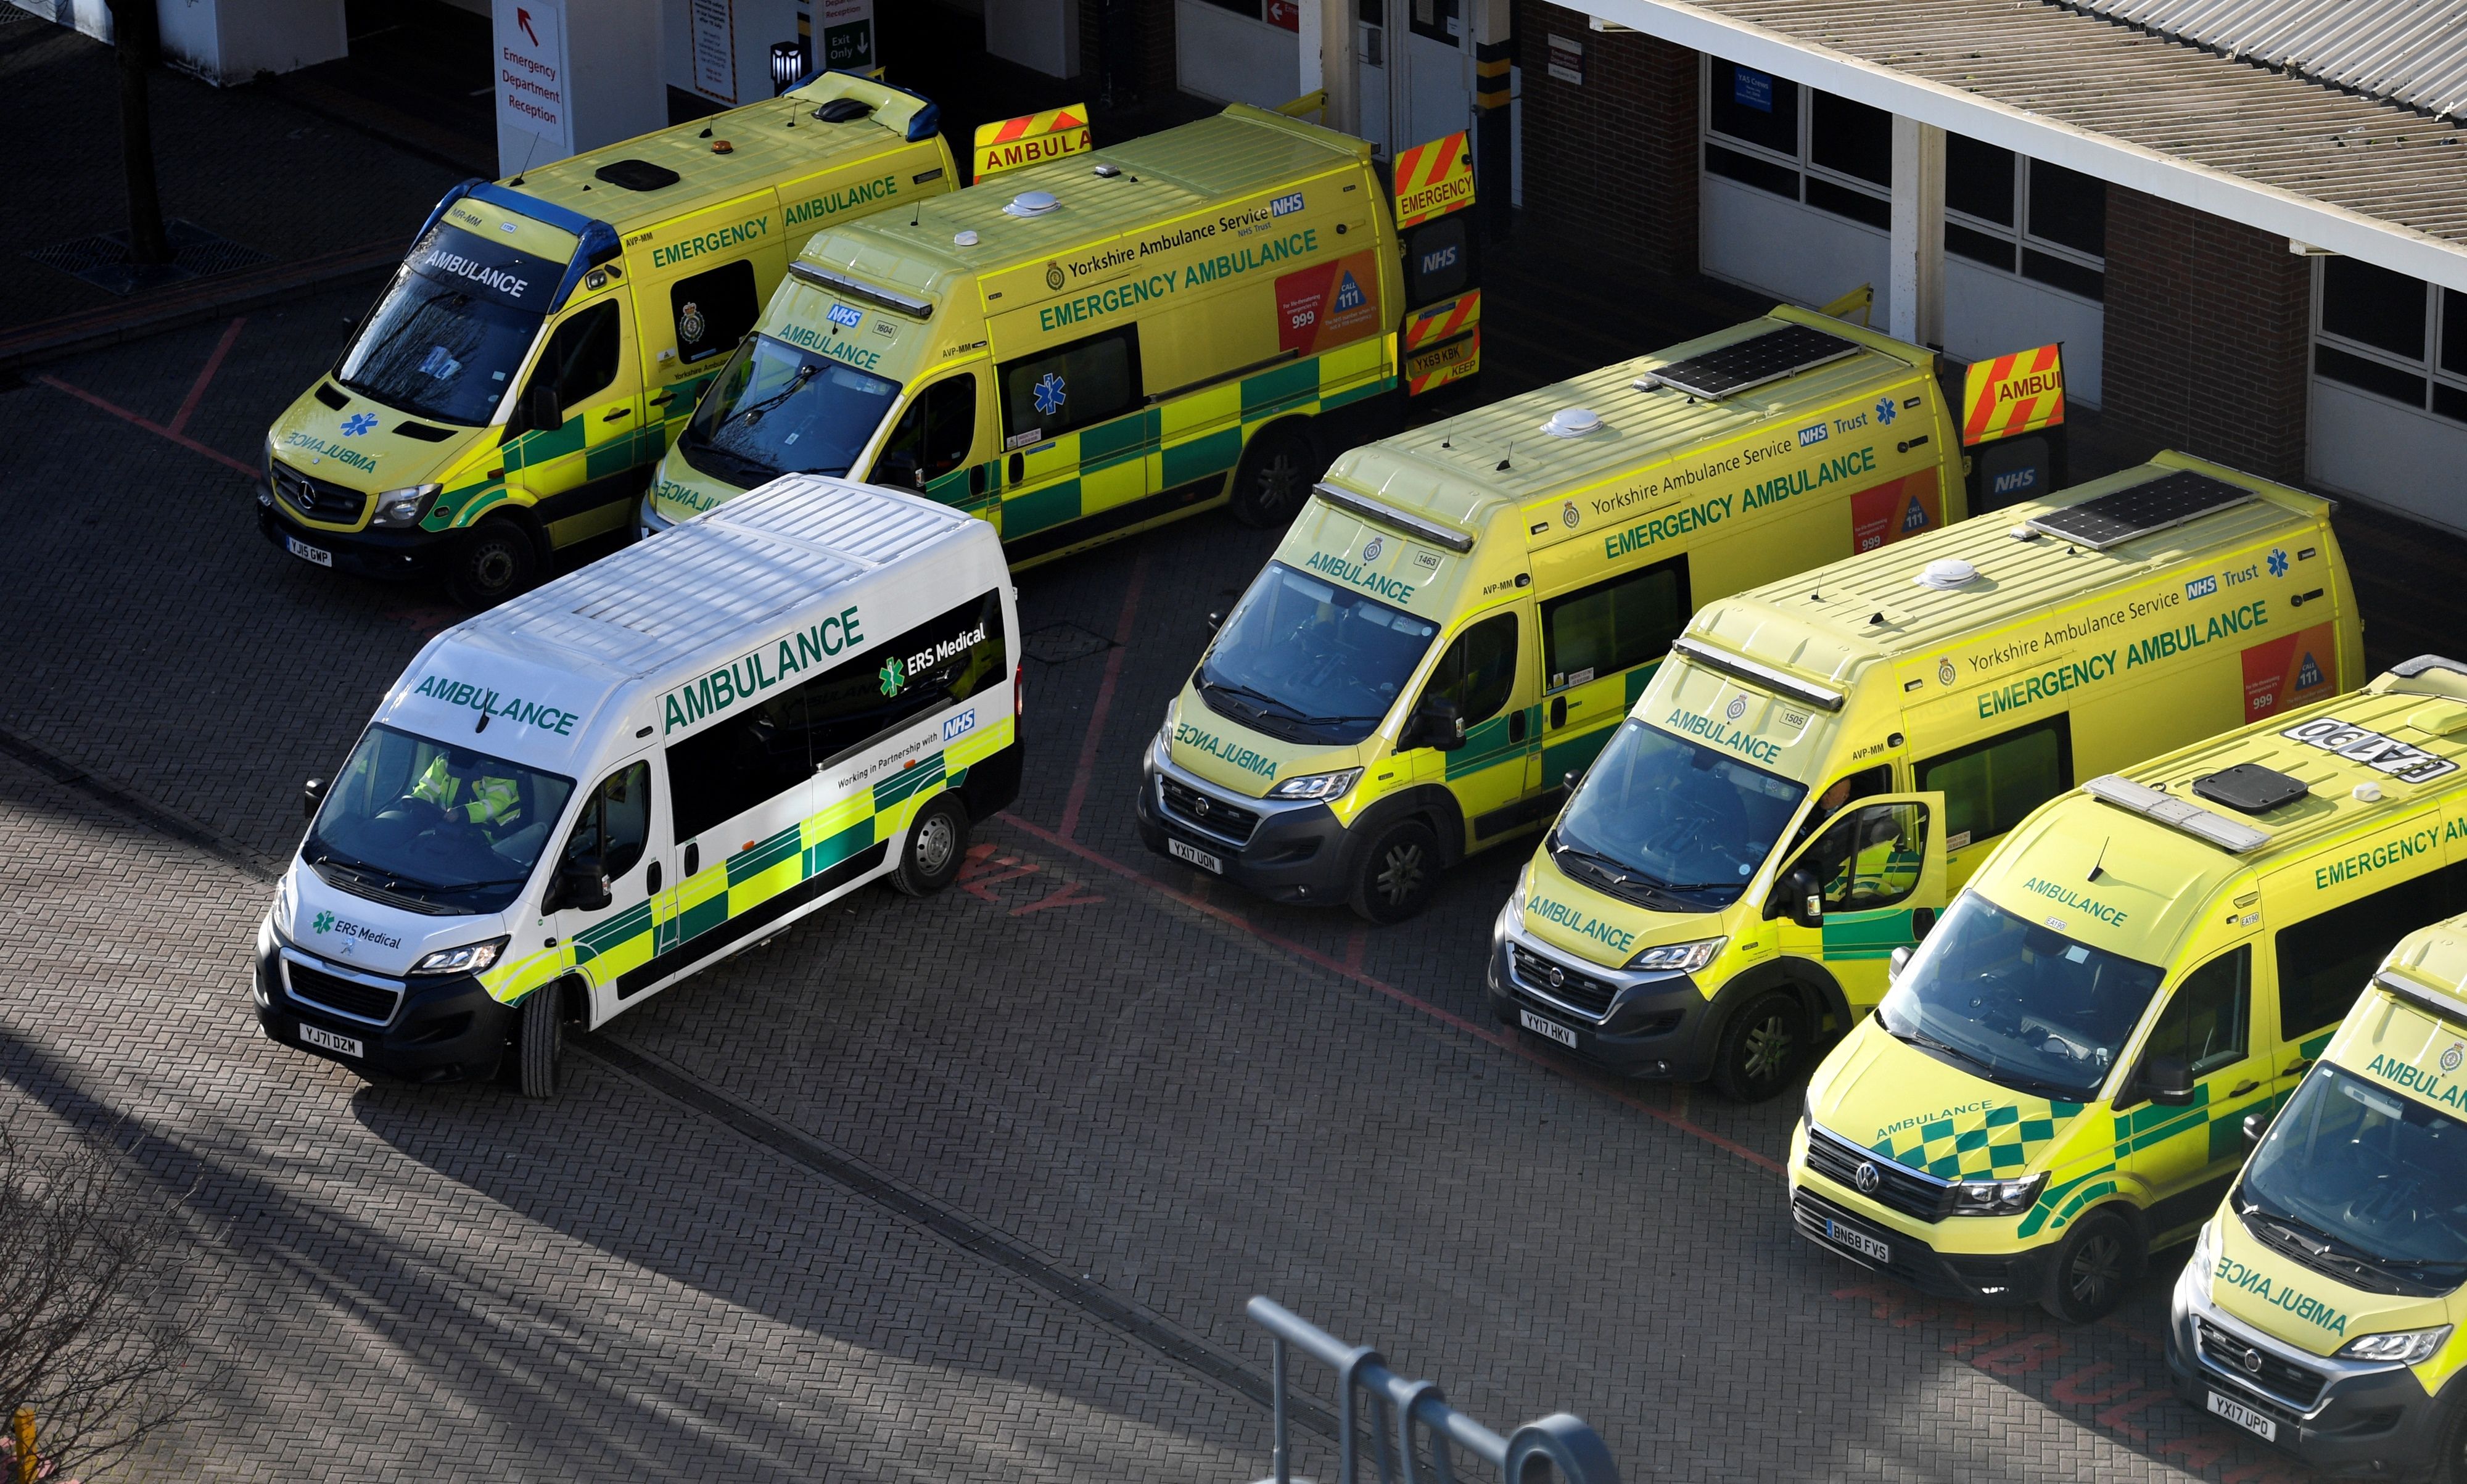 The NHS said there were ‘no plans for any such activity to take place’ at Portsmouth Patient Transport Service base [not pictured]